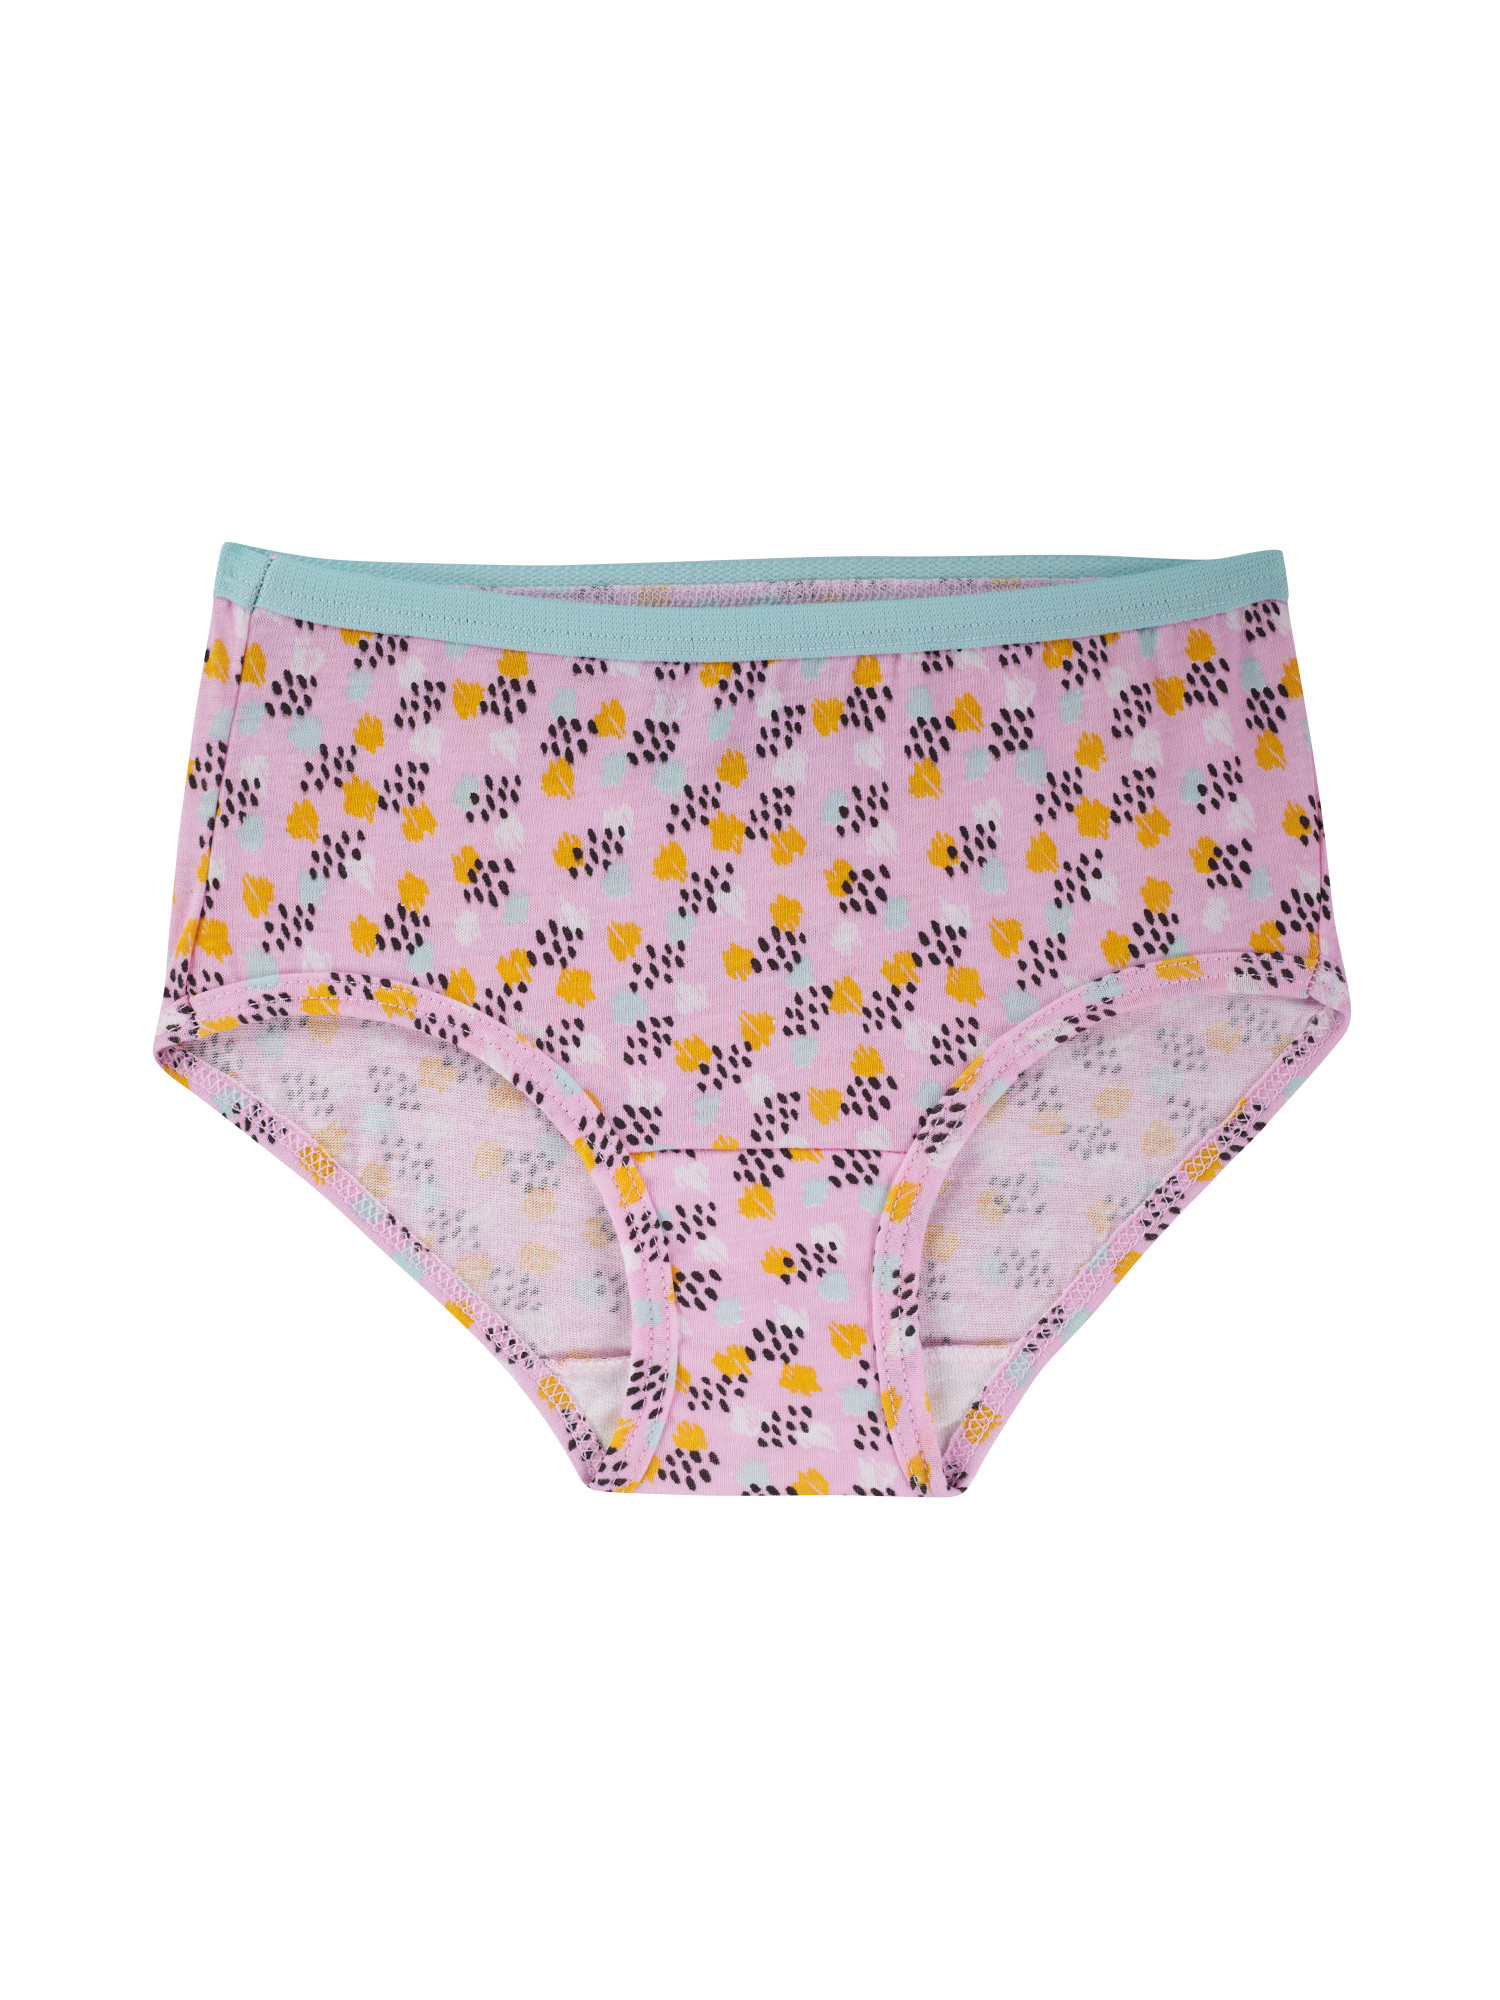 Fruit of the Loom Girls' Cotton Brief Underwear, 20 Pack - image 4 of 10